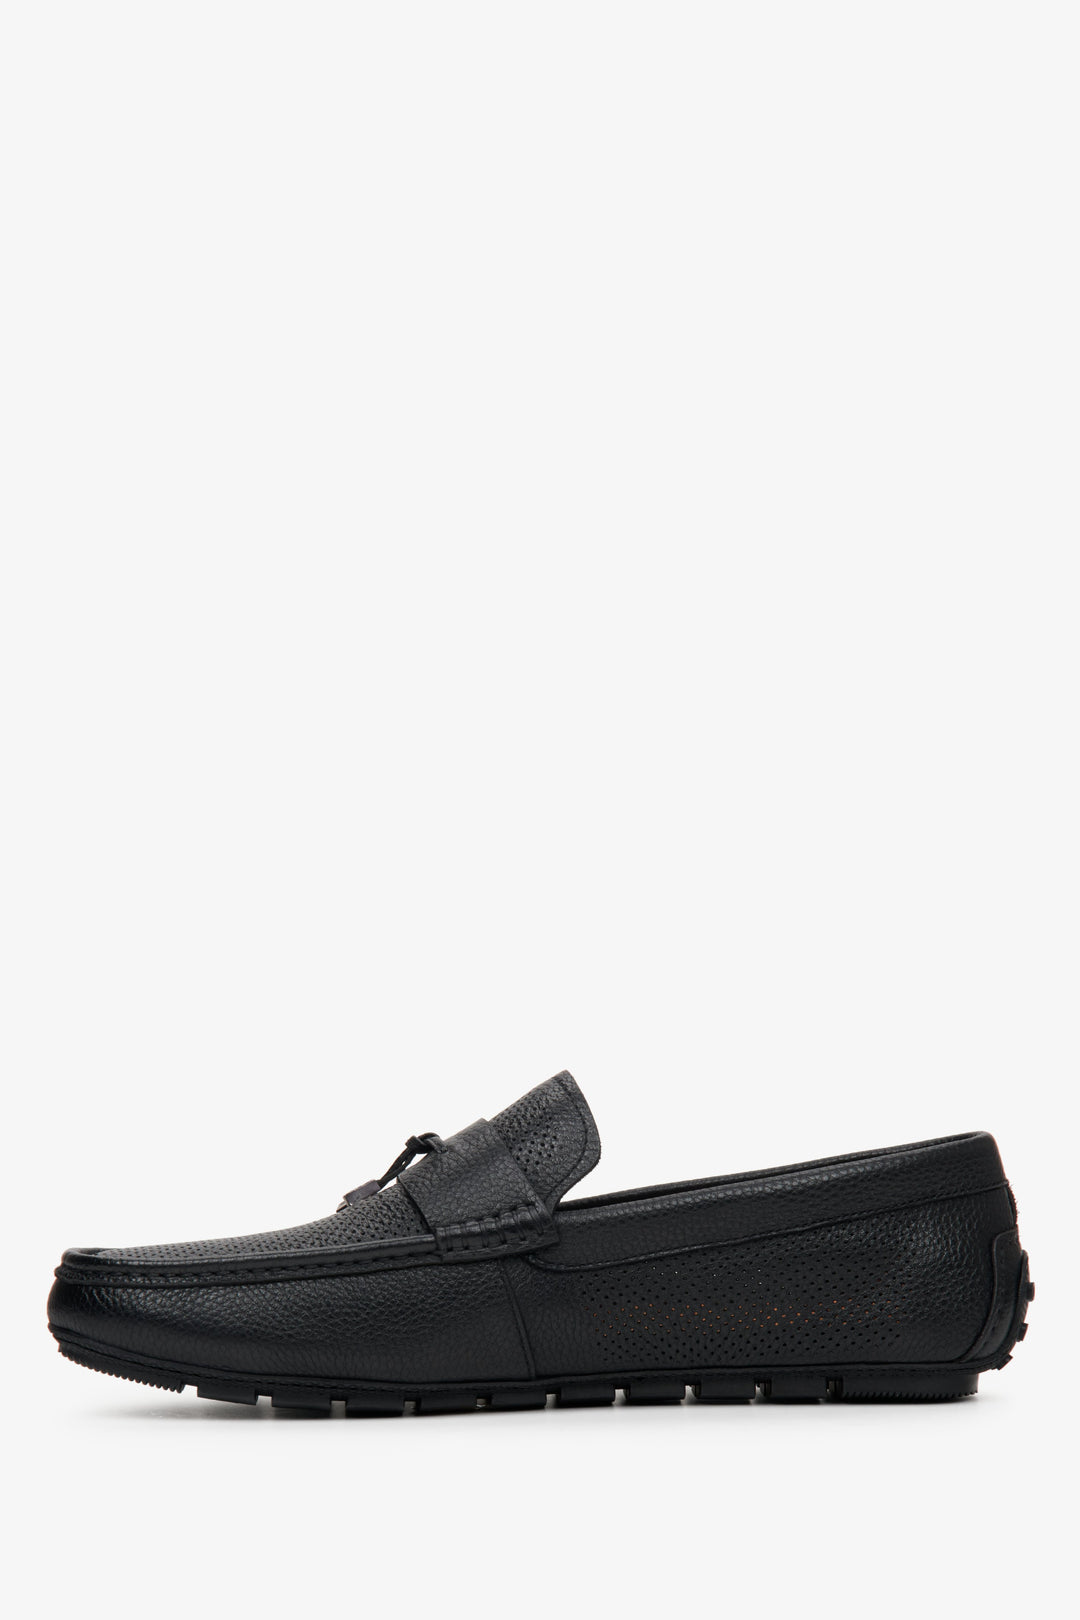 Men's black leather loafers by Estro for fall - shoe profile.